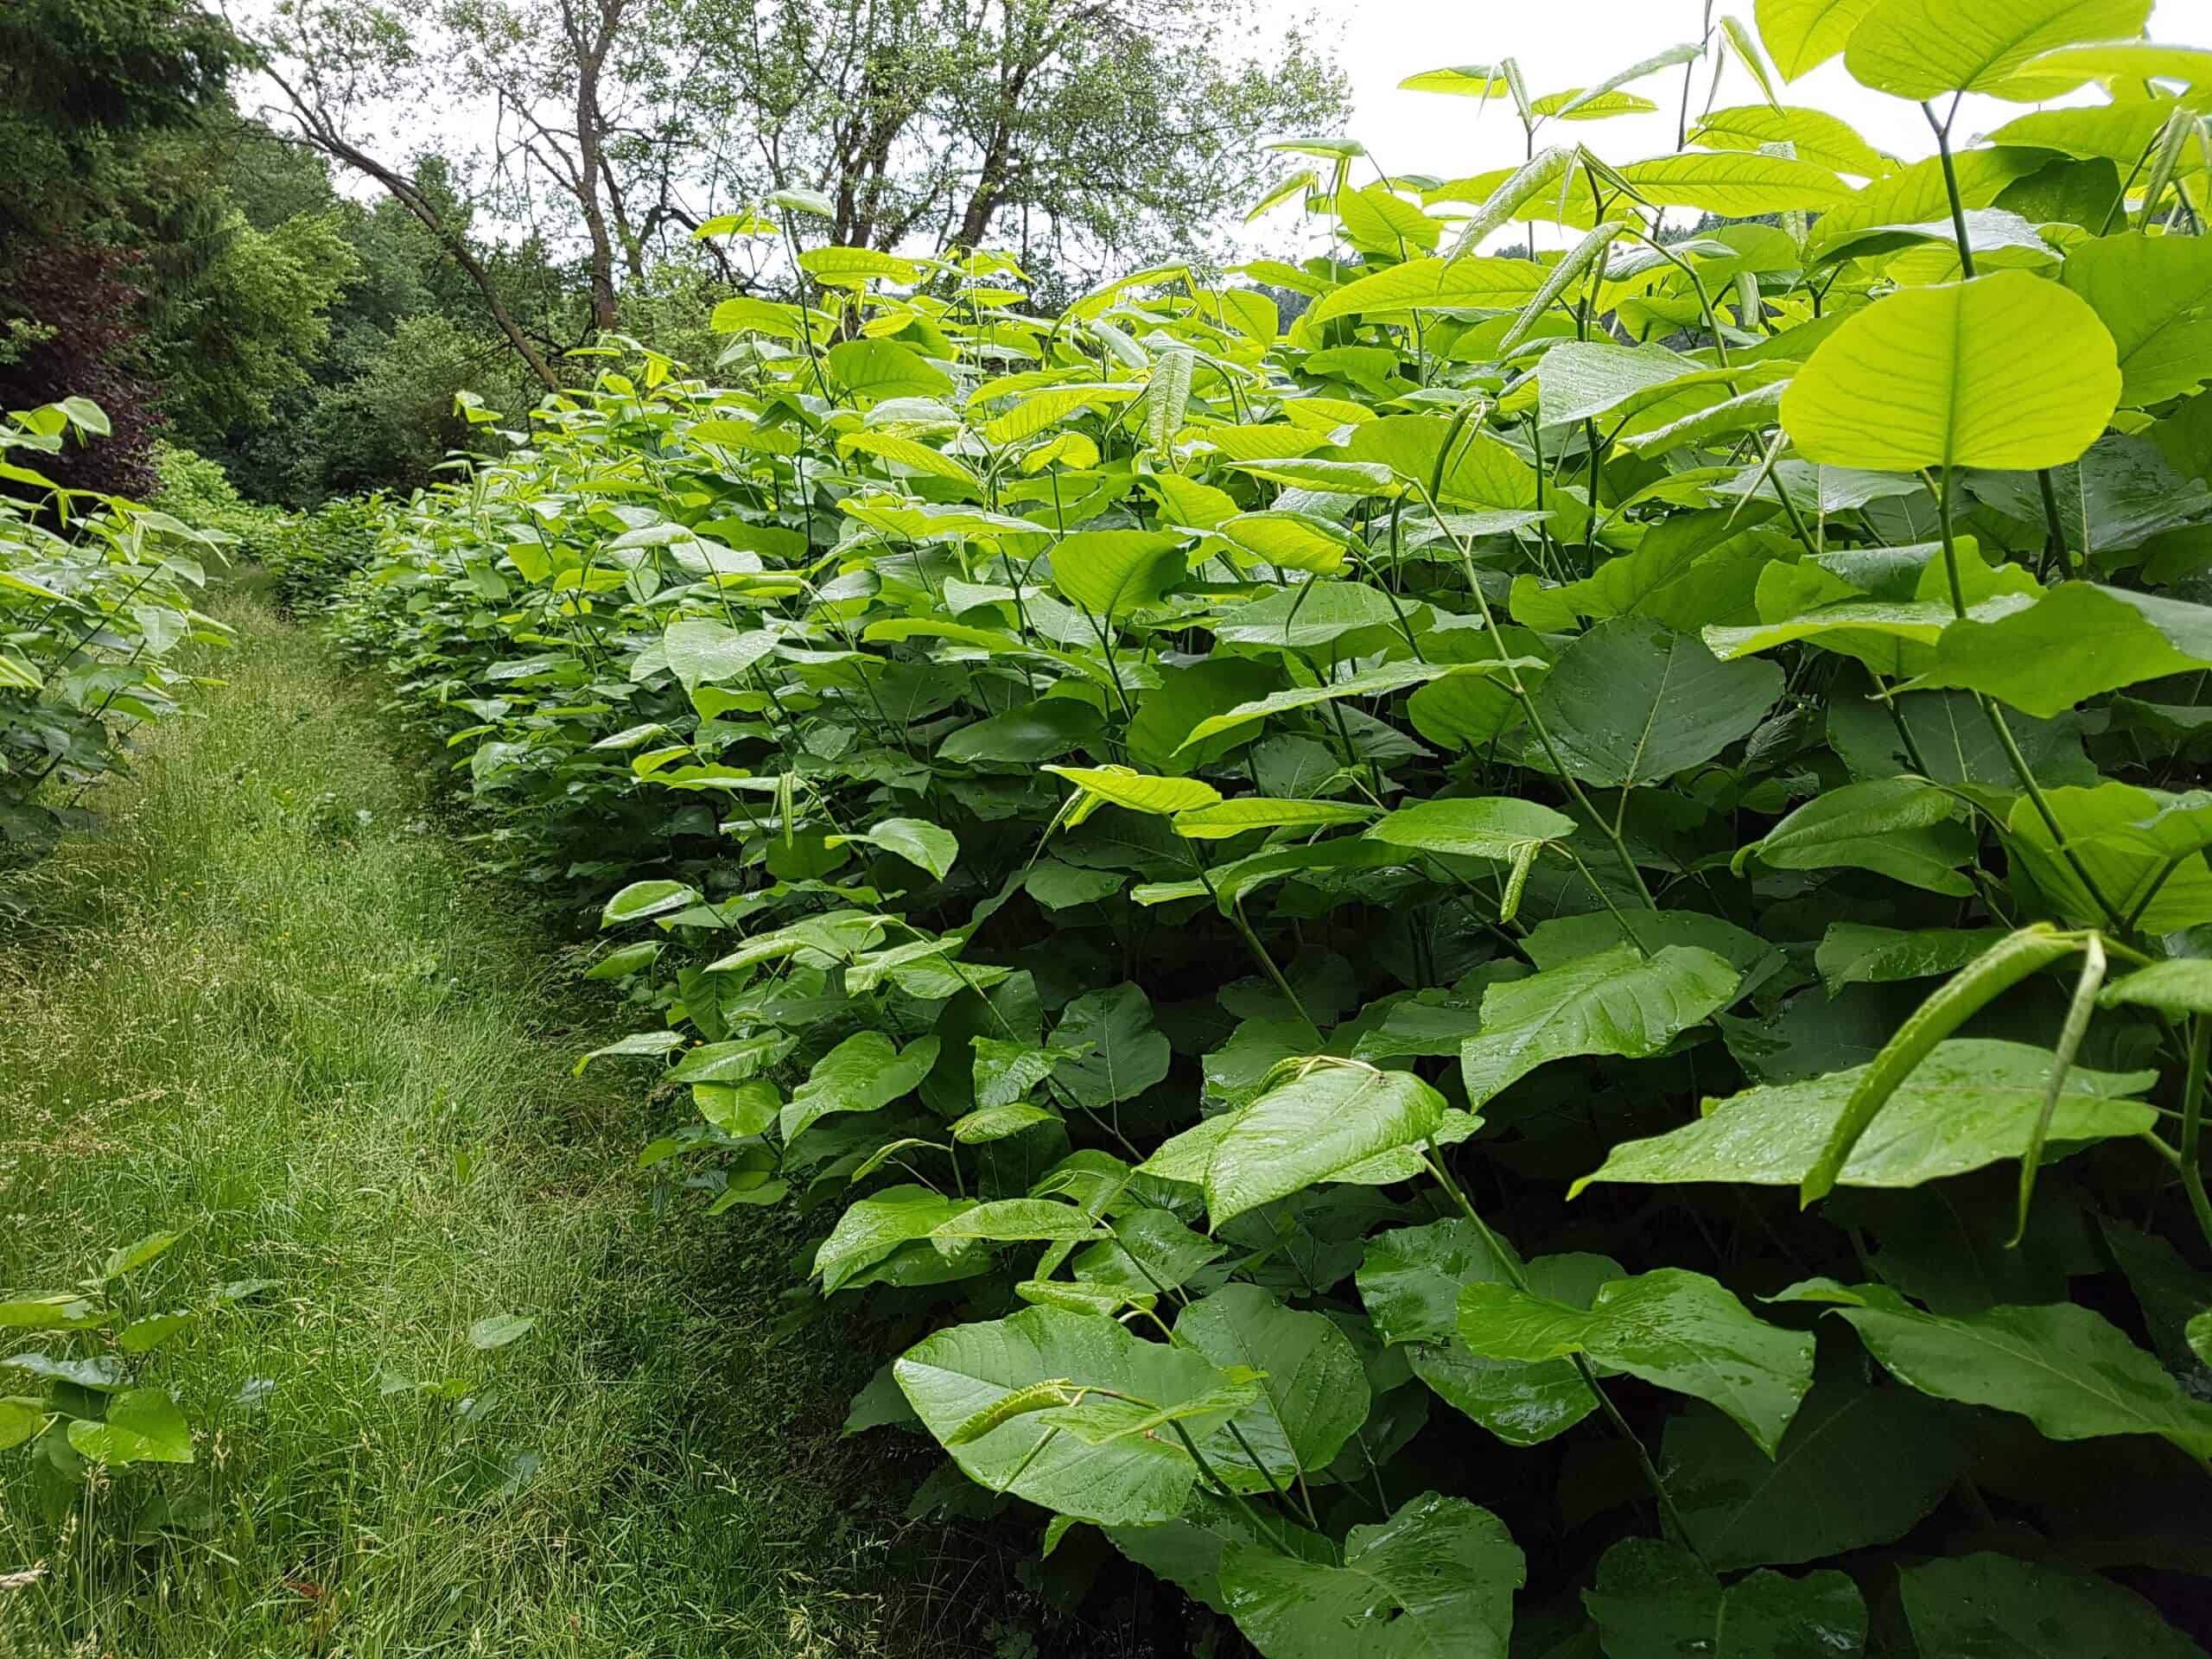 How do I know if I have Japanese knotweed is becoming easier to spot due to its dominance over other plant species?